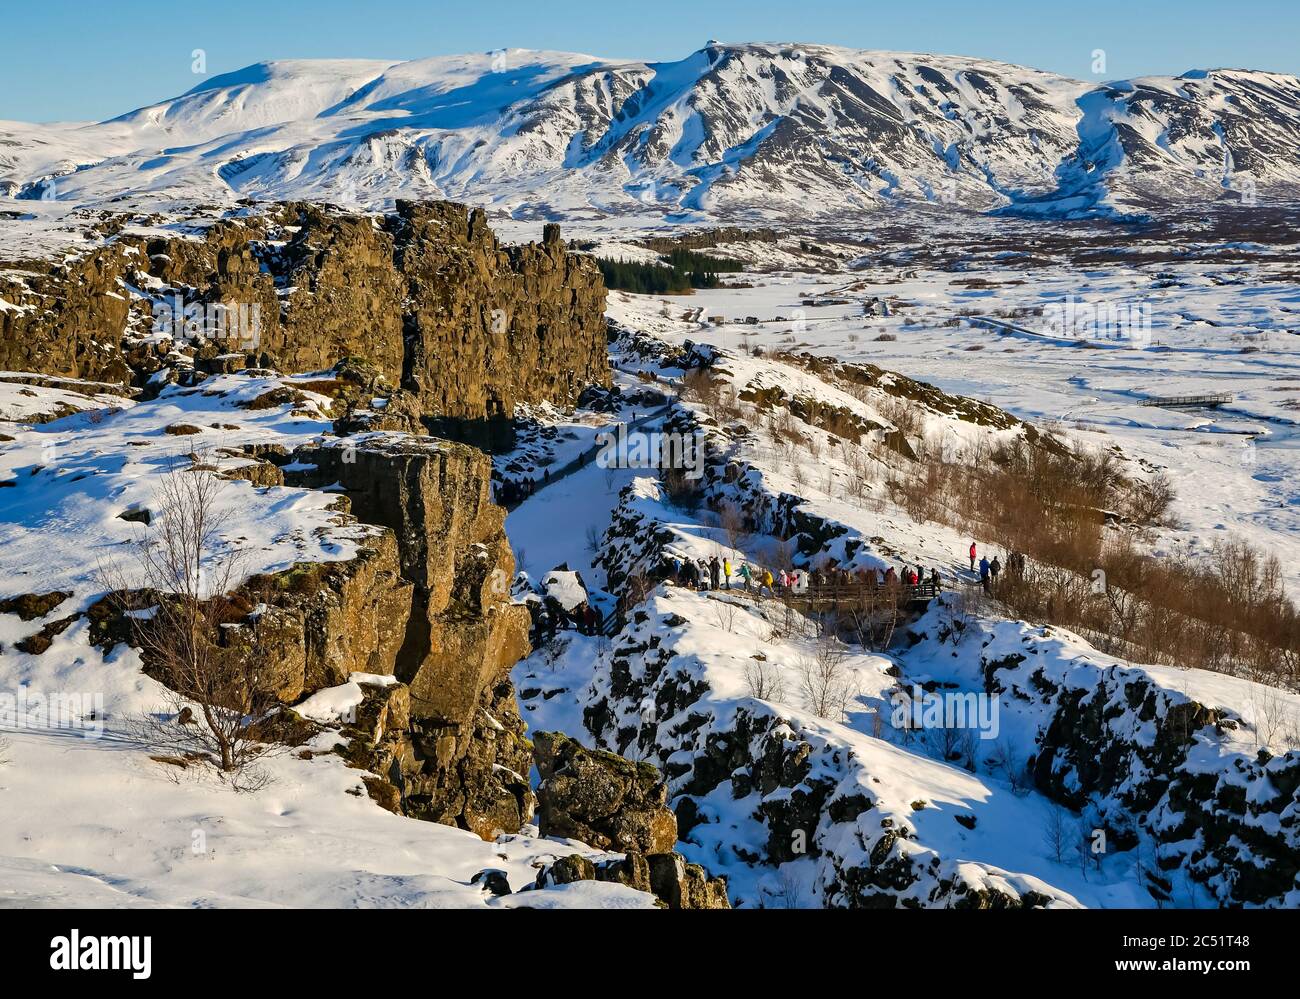 Tourists in the Mid-Atlantic Ridge boundary plate fault gorge with tourists in Winter, Golden Circle, Iceland Stock Photo